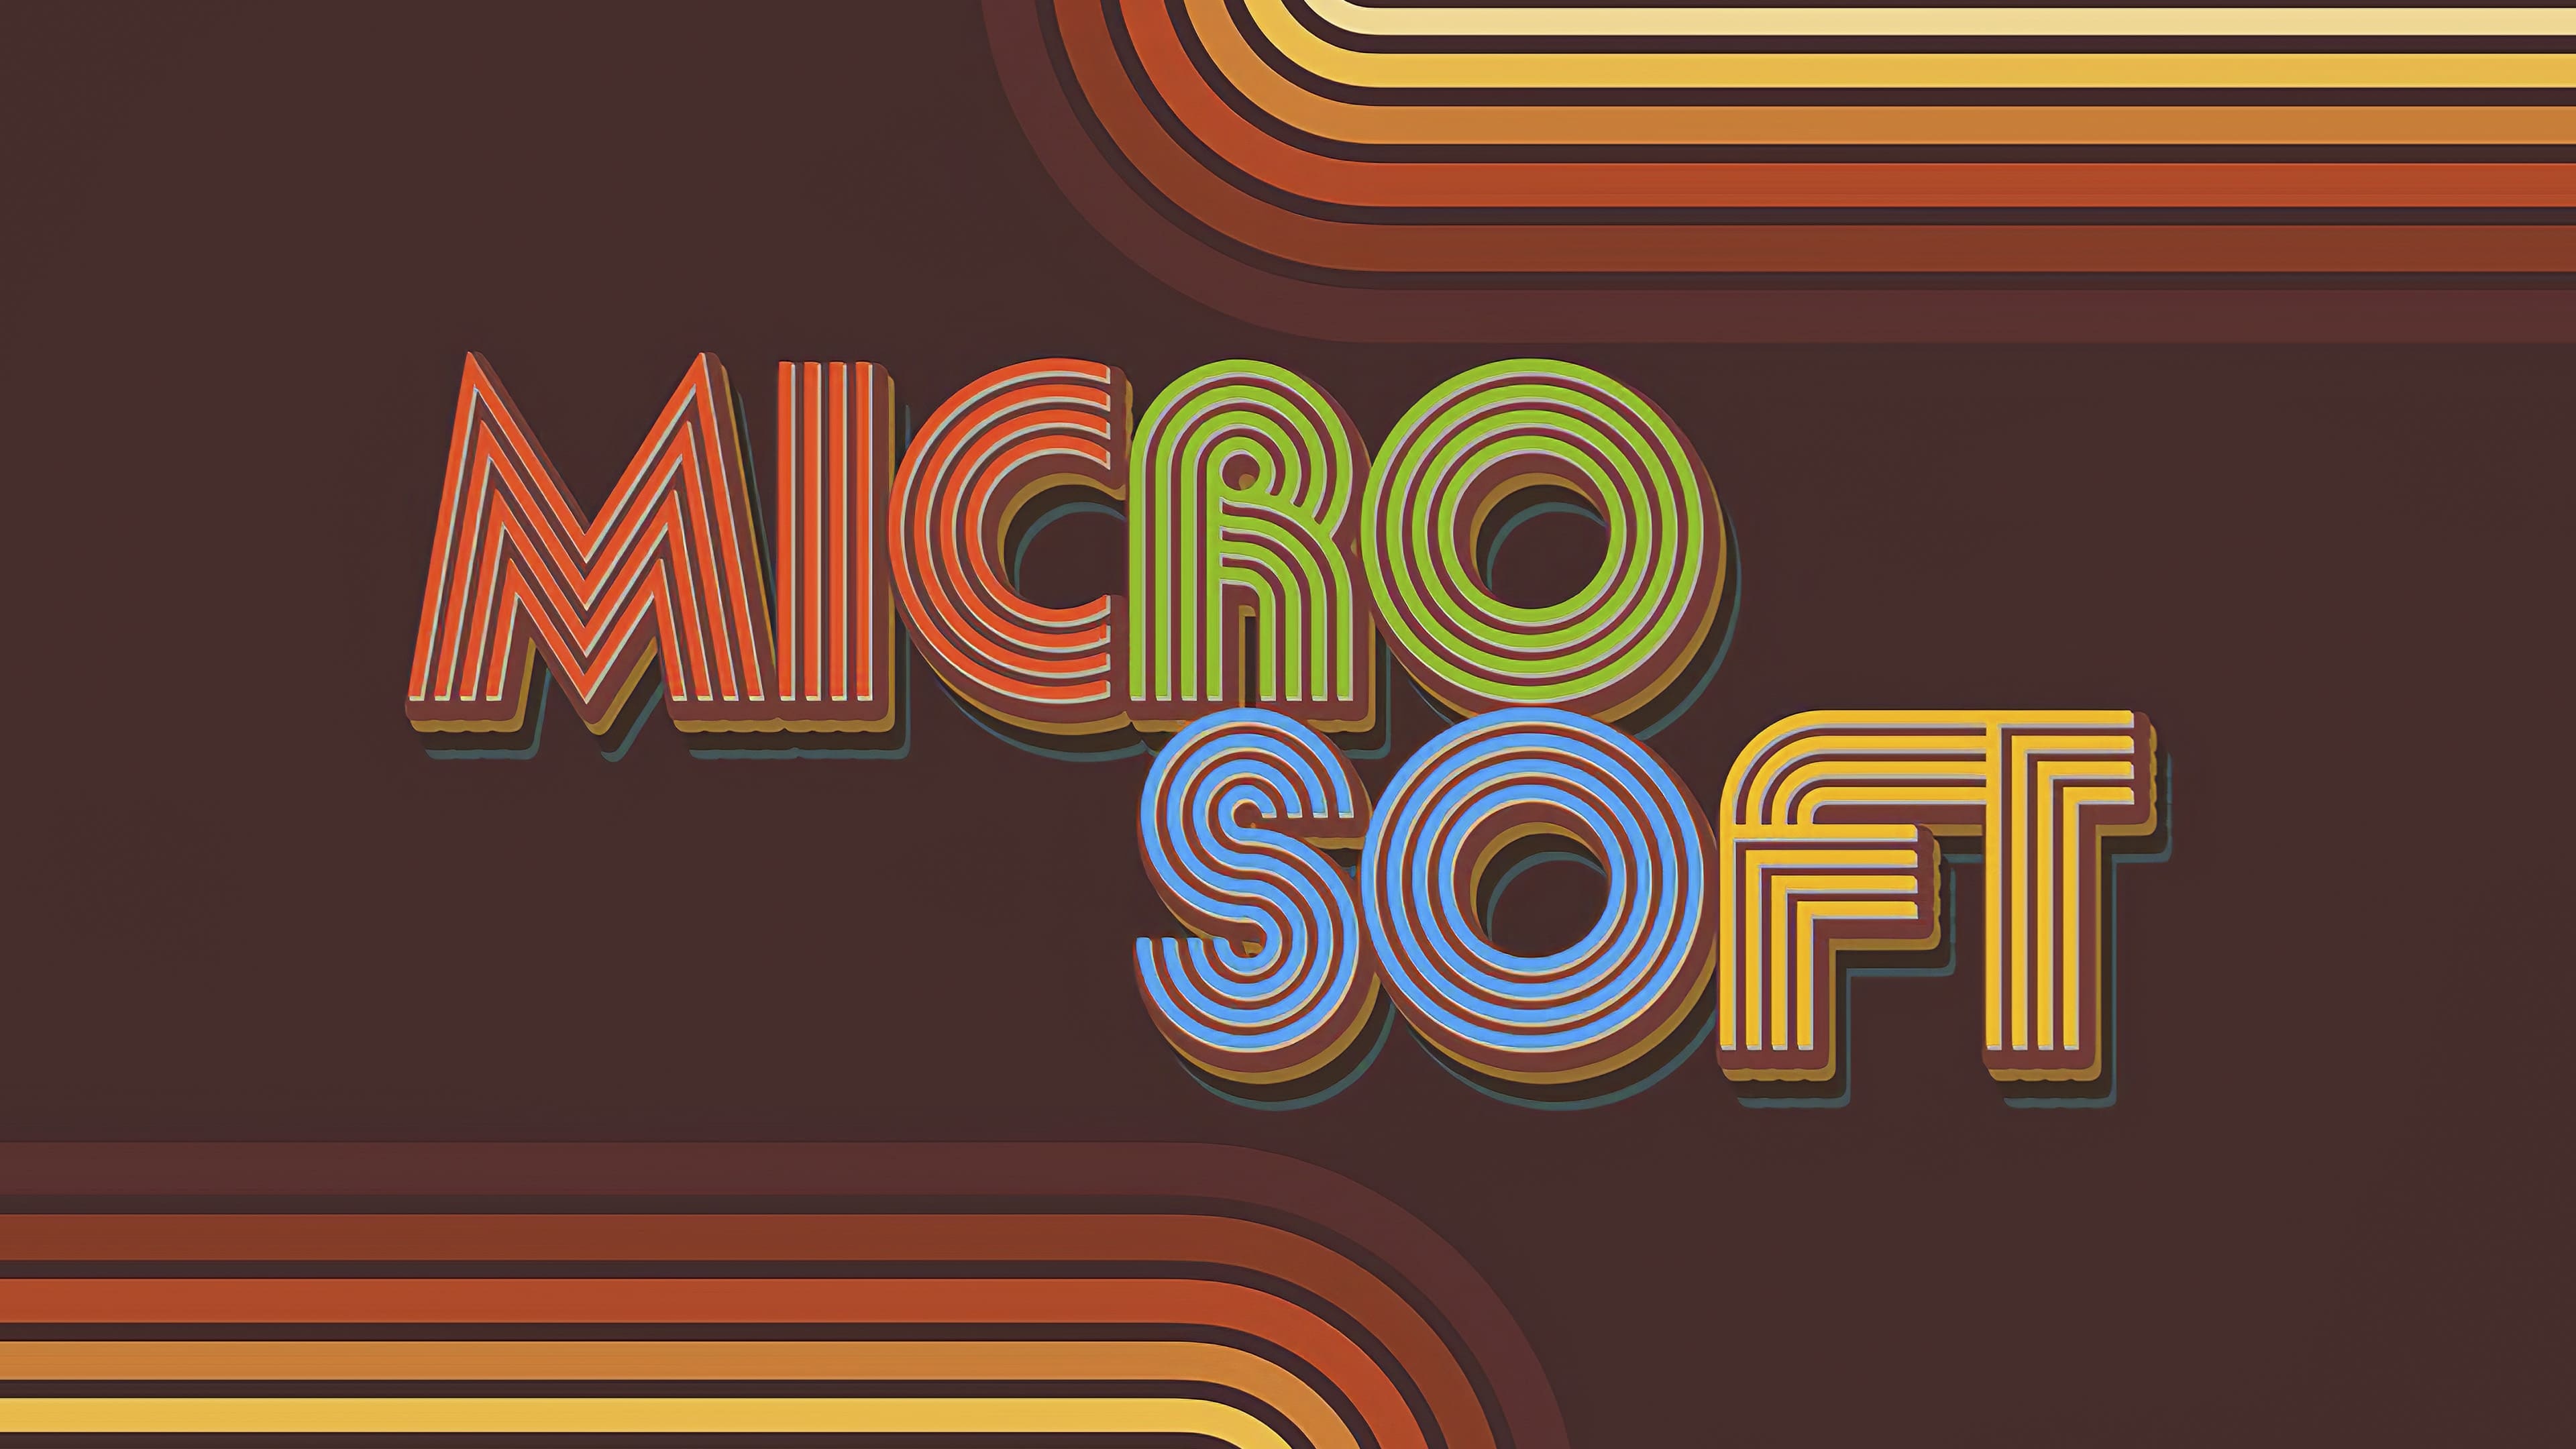 Microsoft: A technology corporation, founded in 1975, to develop and sell BASIC interpreters for the Altair 8800. 3840x2160 4K Background.